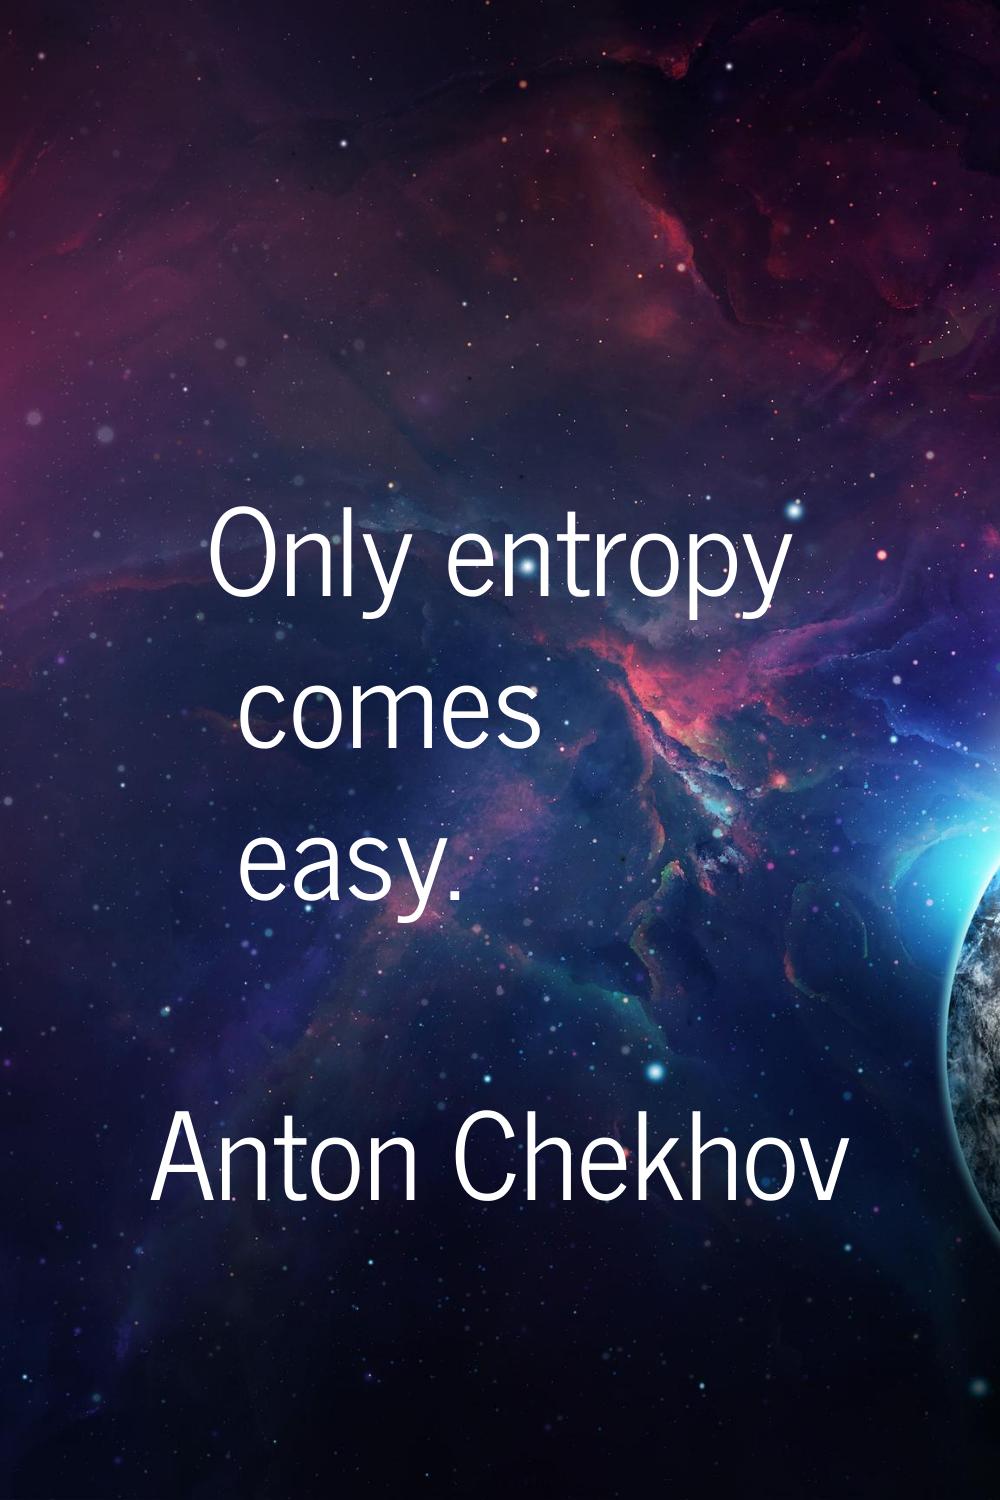 Only entropy comes easy.